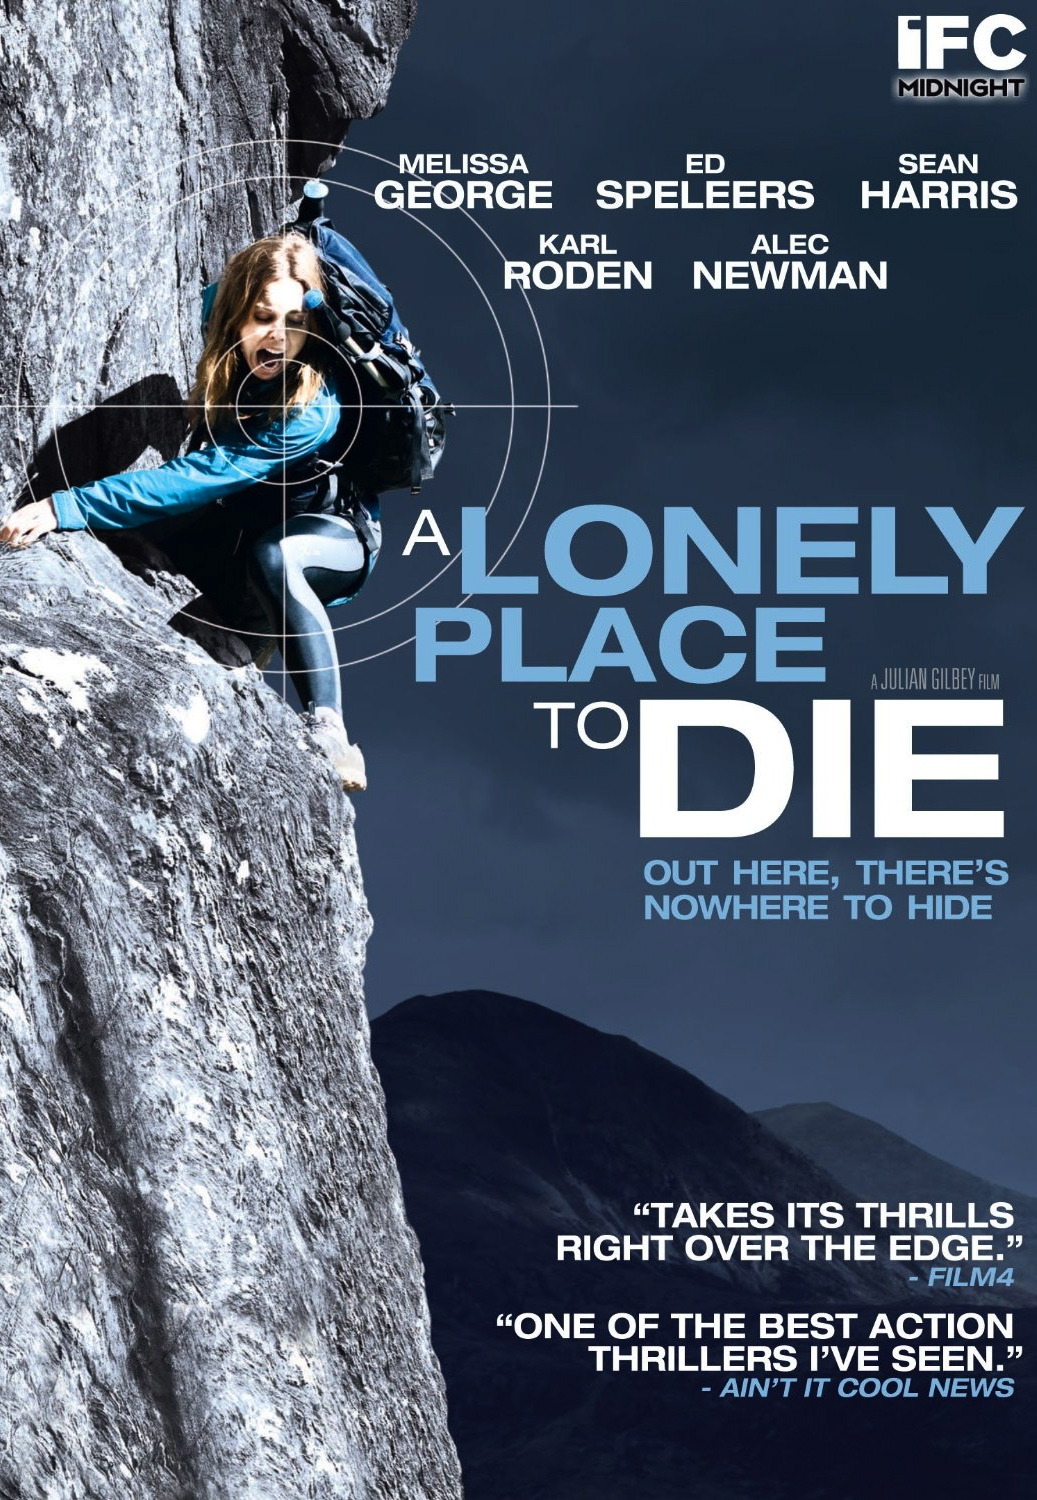 A Lonely Place To Die HD wallpapers, Desktop wallpaper - most viewed